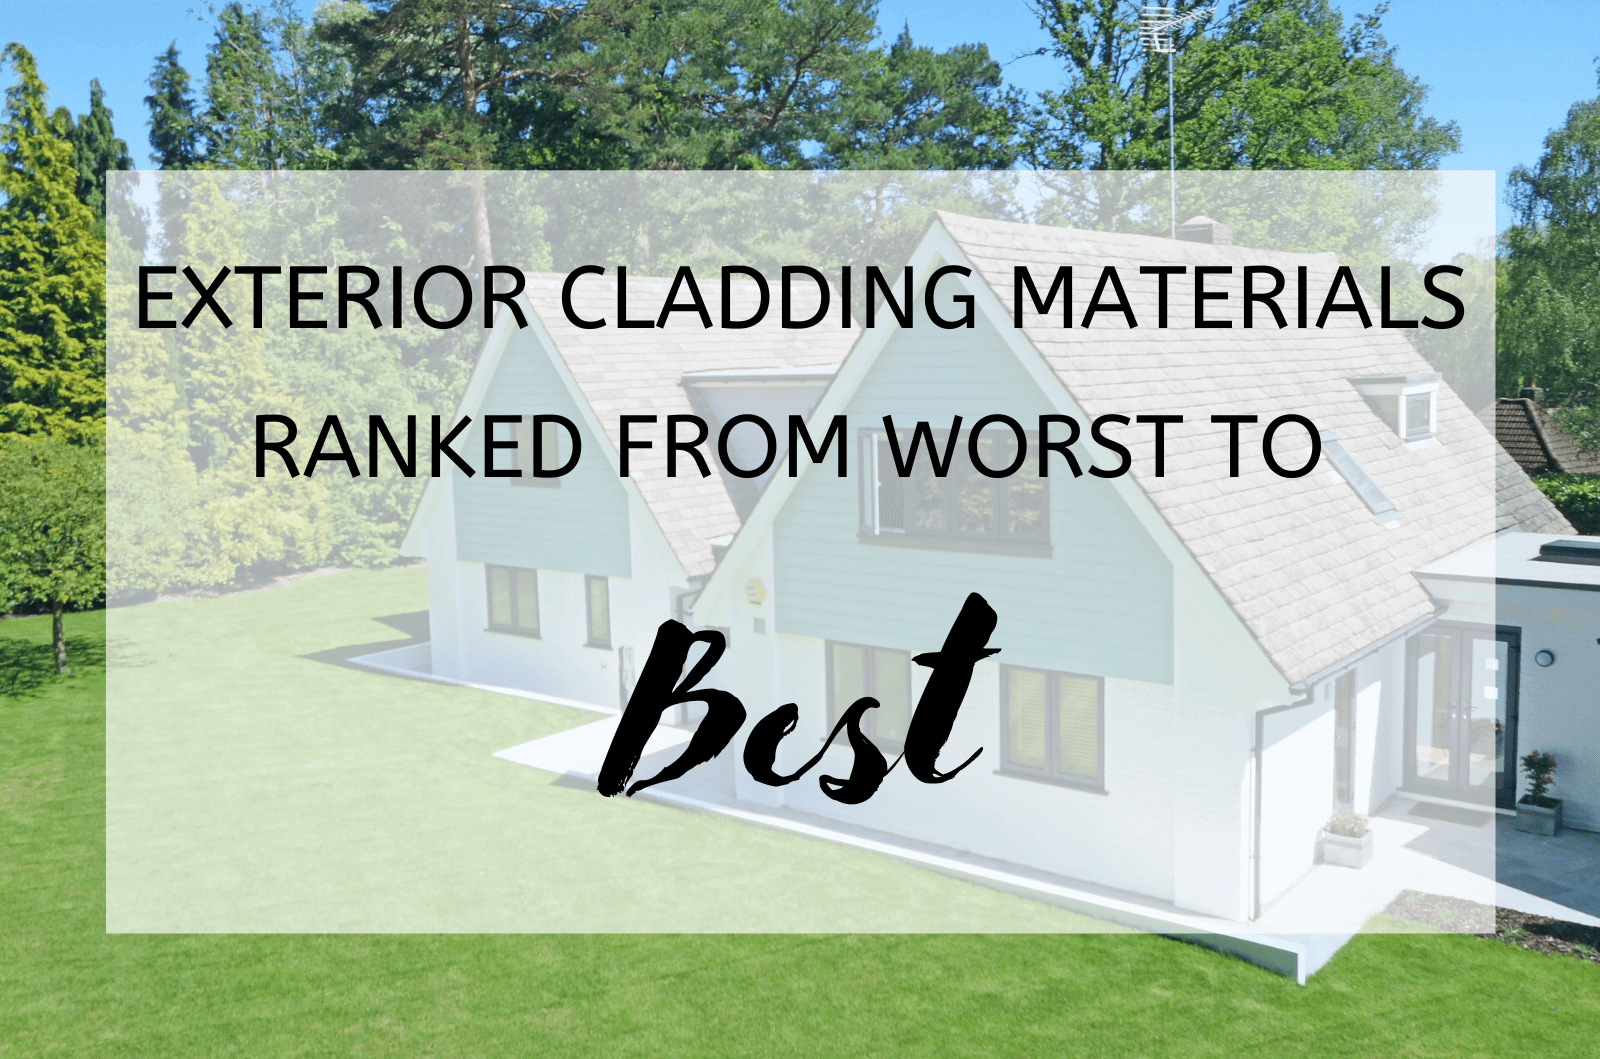 Exterior Cladding Materials Ranked From Worst To Best